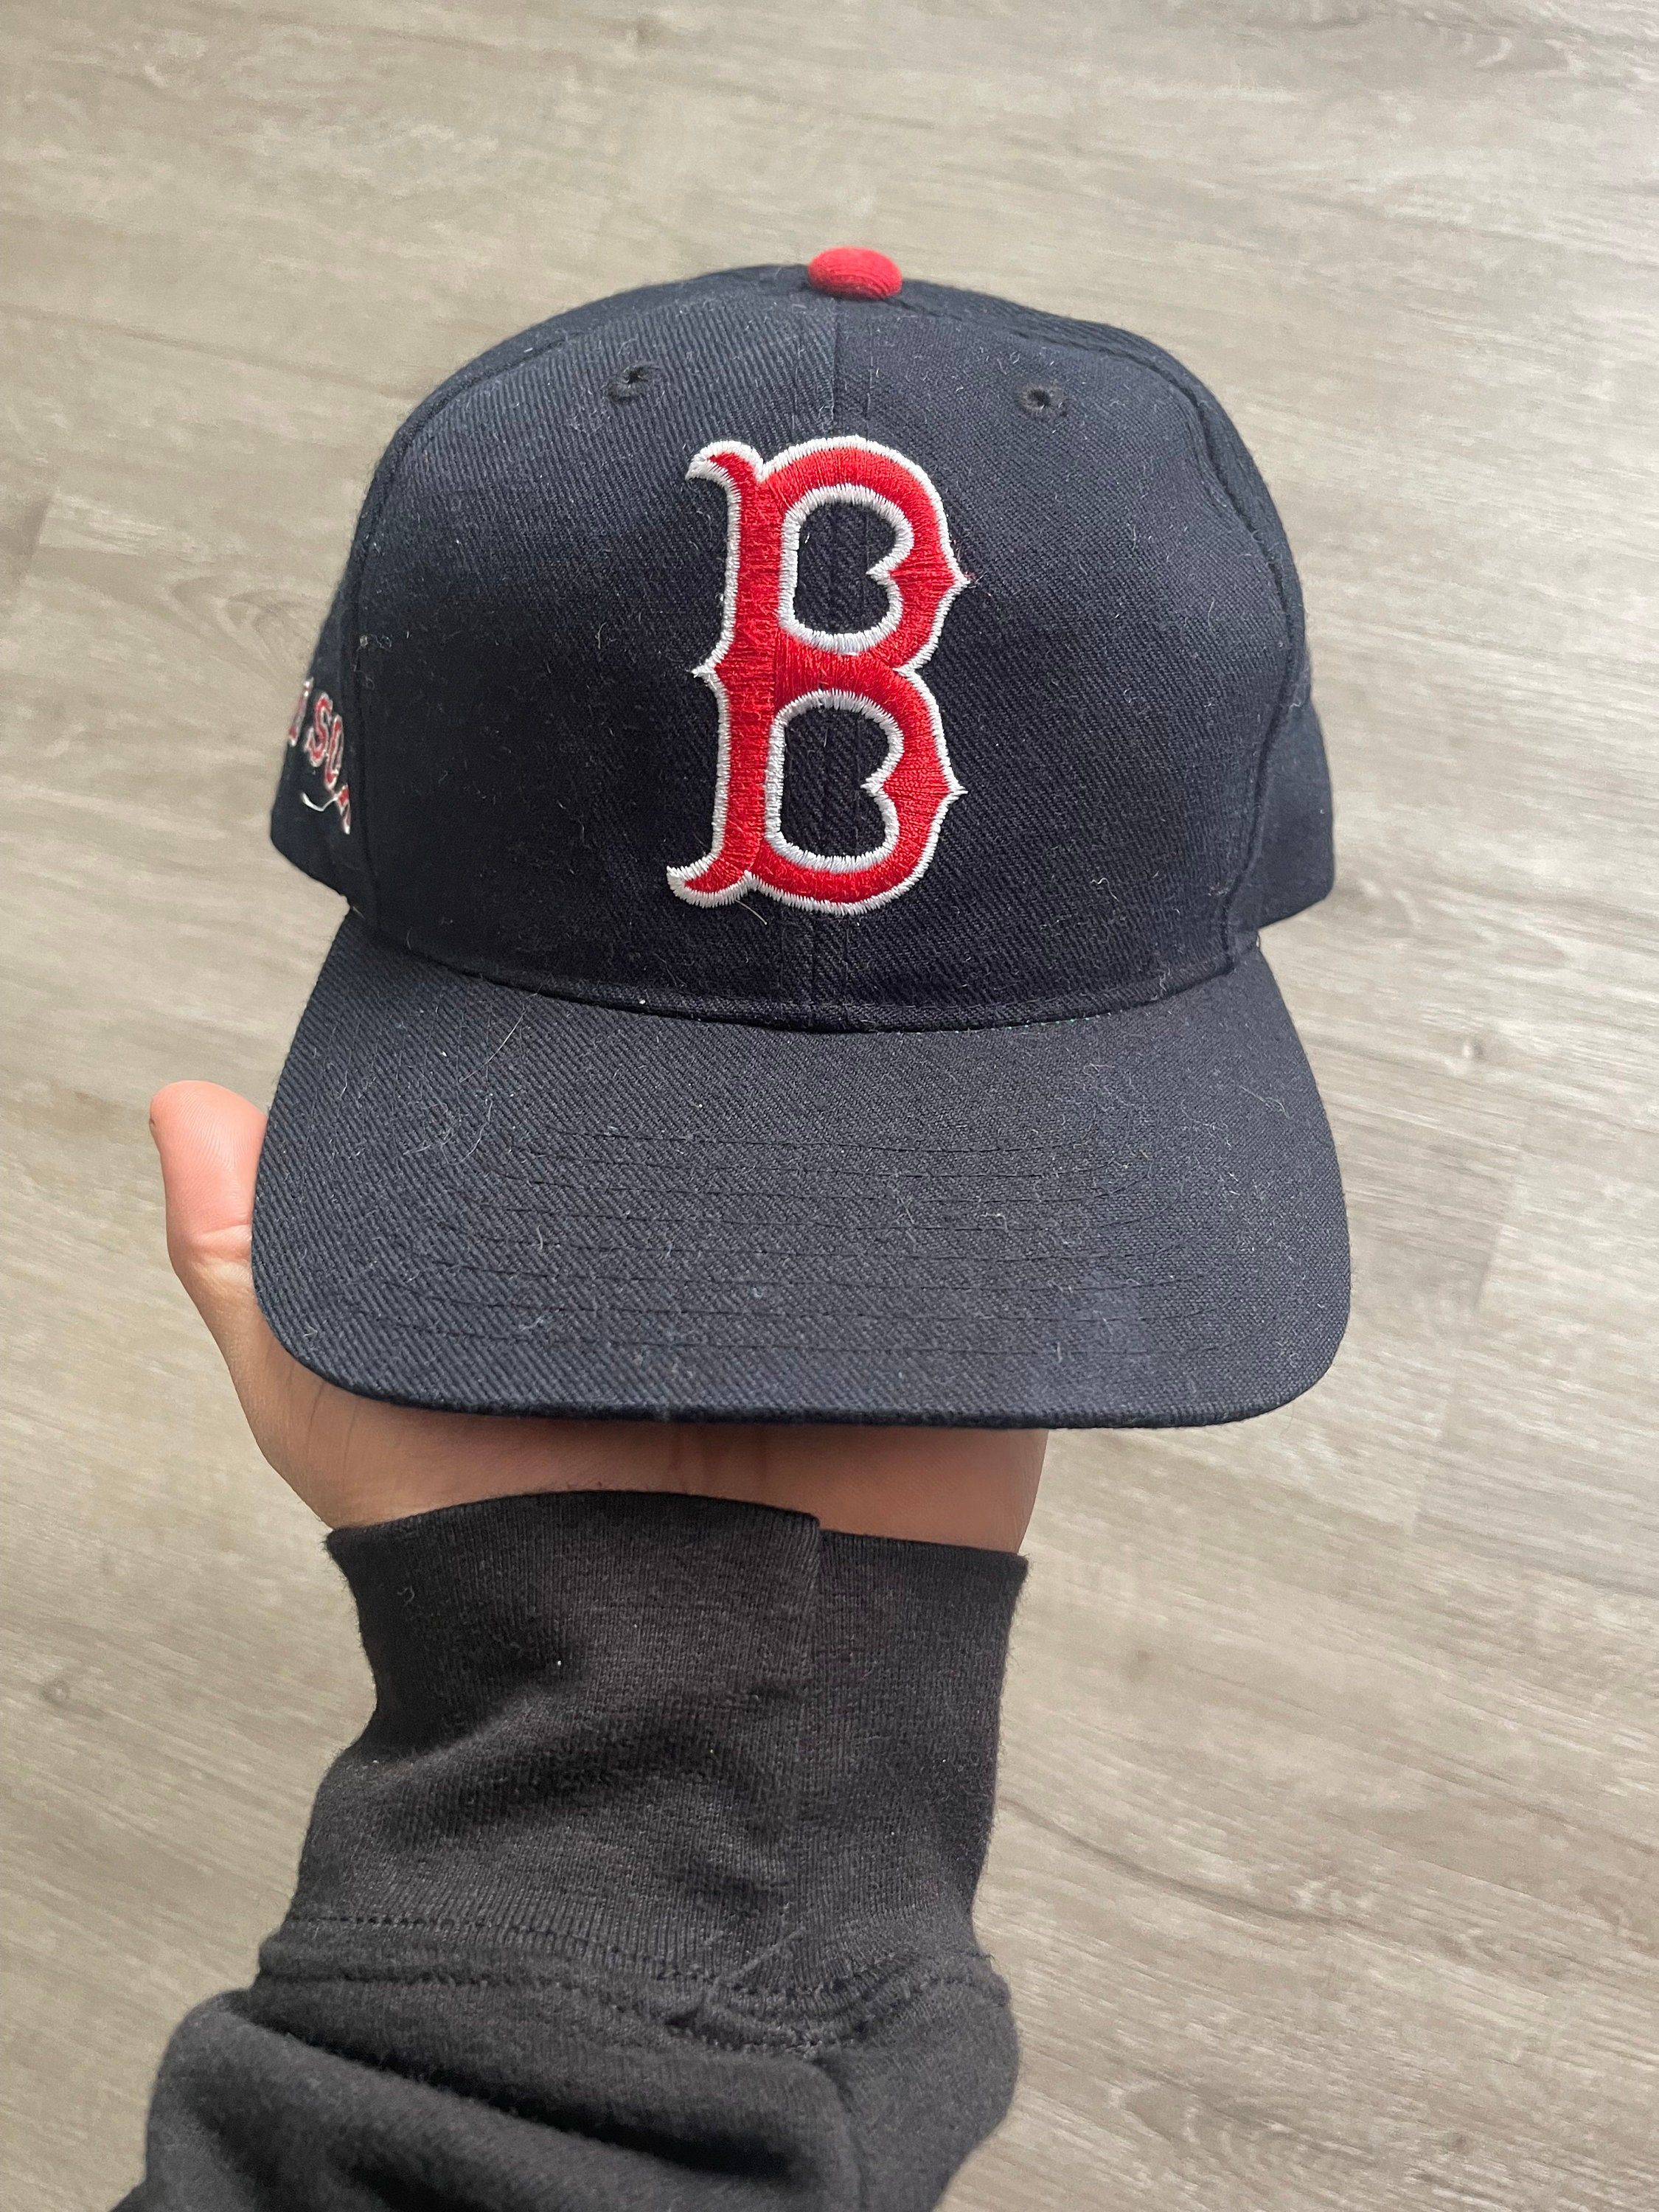 Boston Red Sox Hat Super Distressed baseball cap dyed washed retro